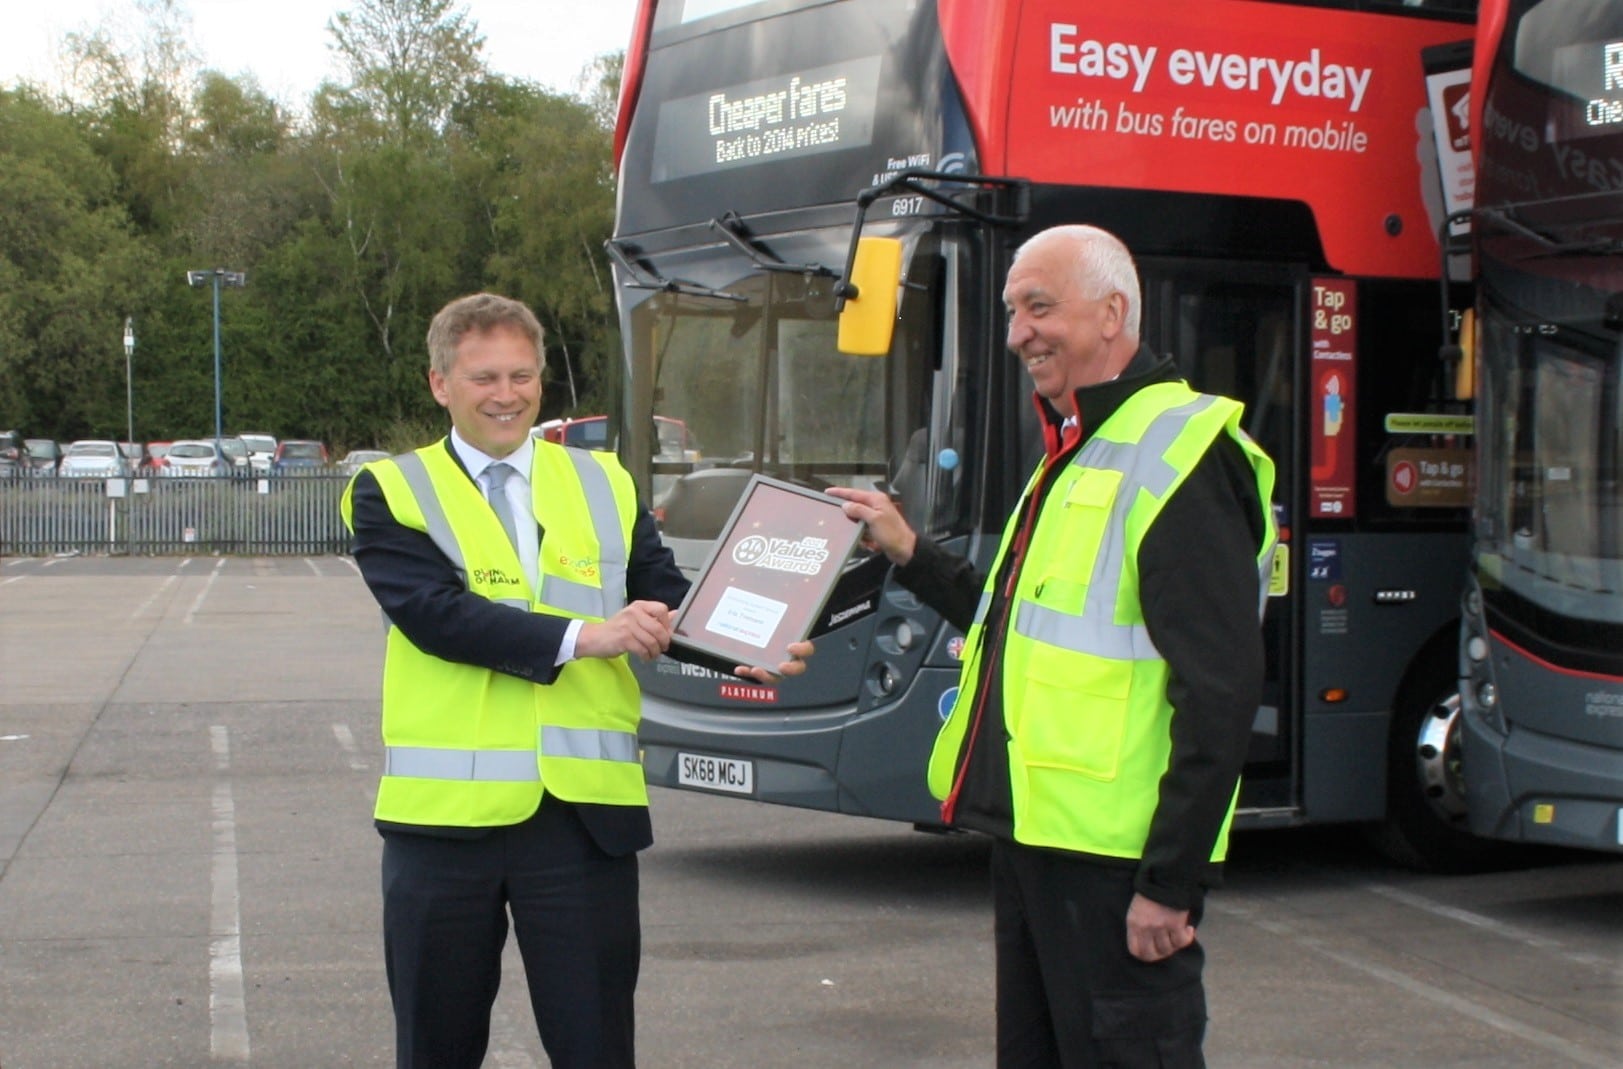 NXWM and Grant Shapps recognise employee's over 40 years of service